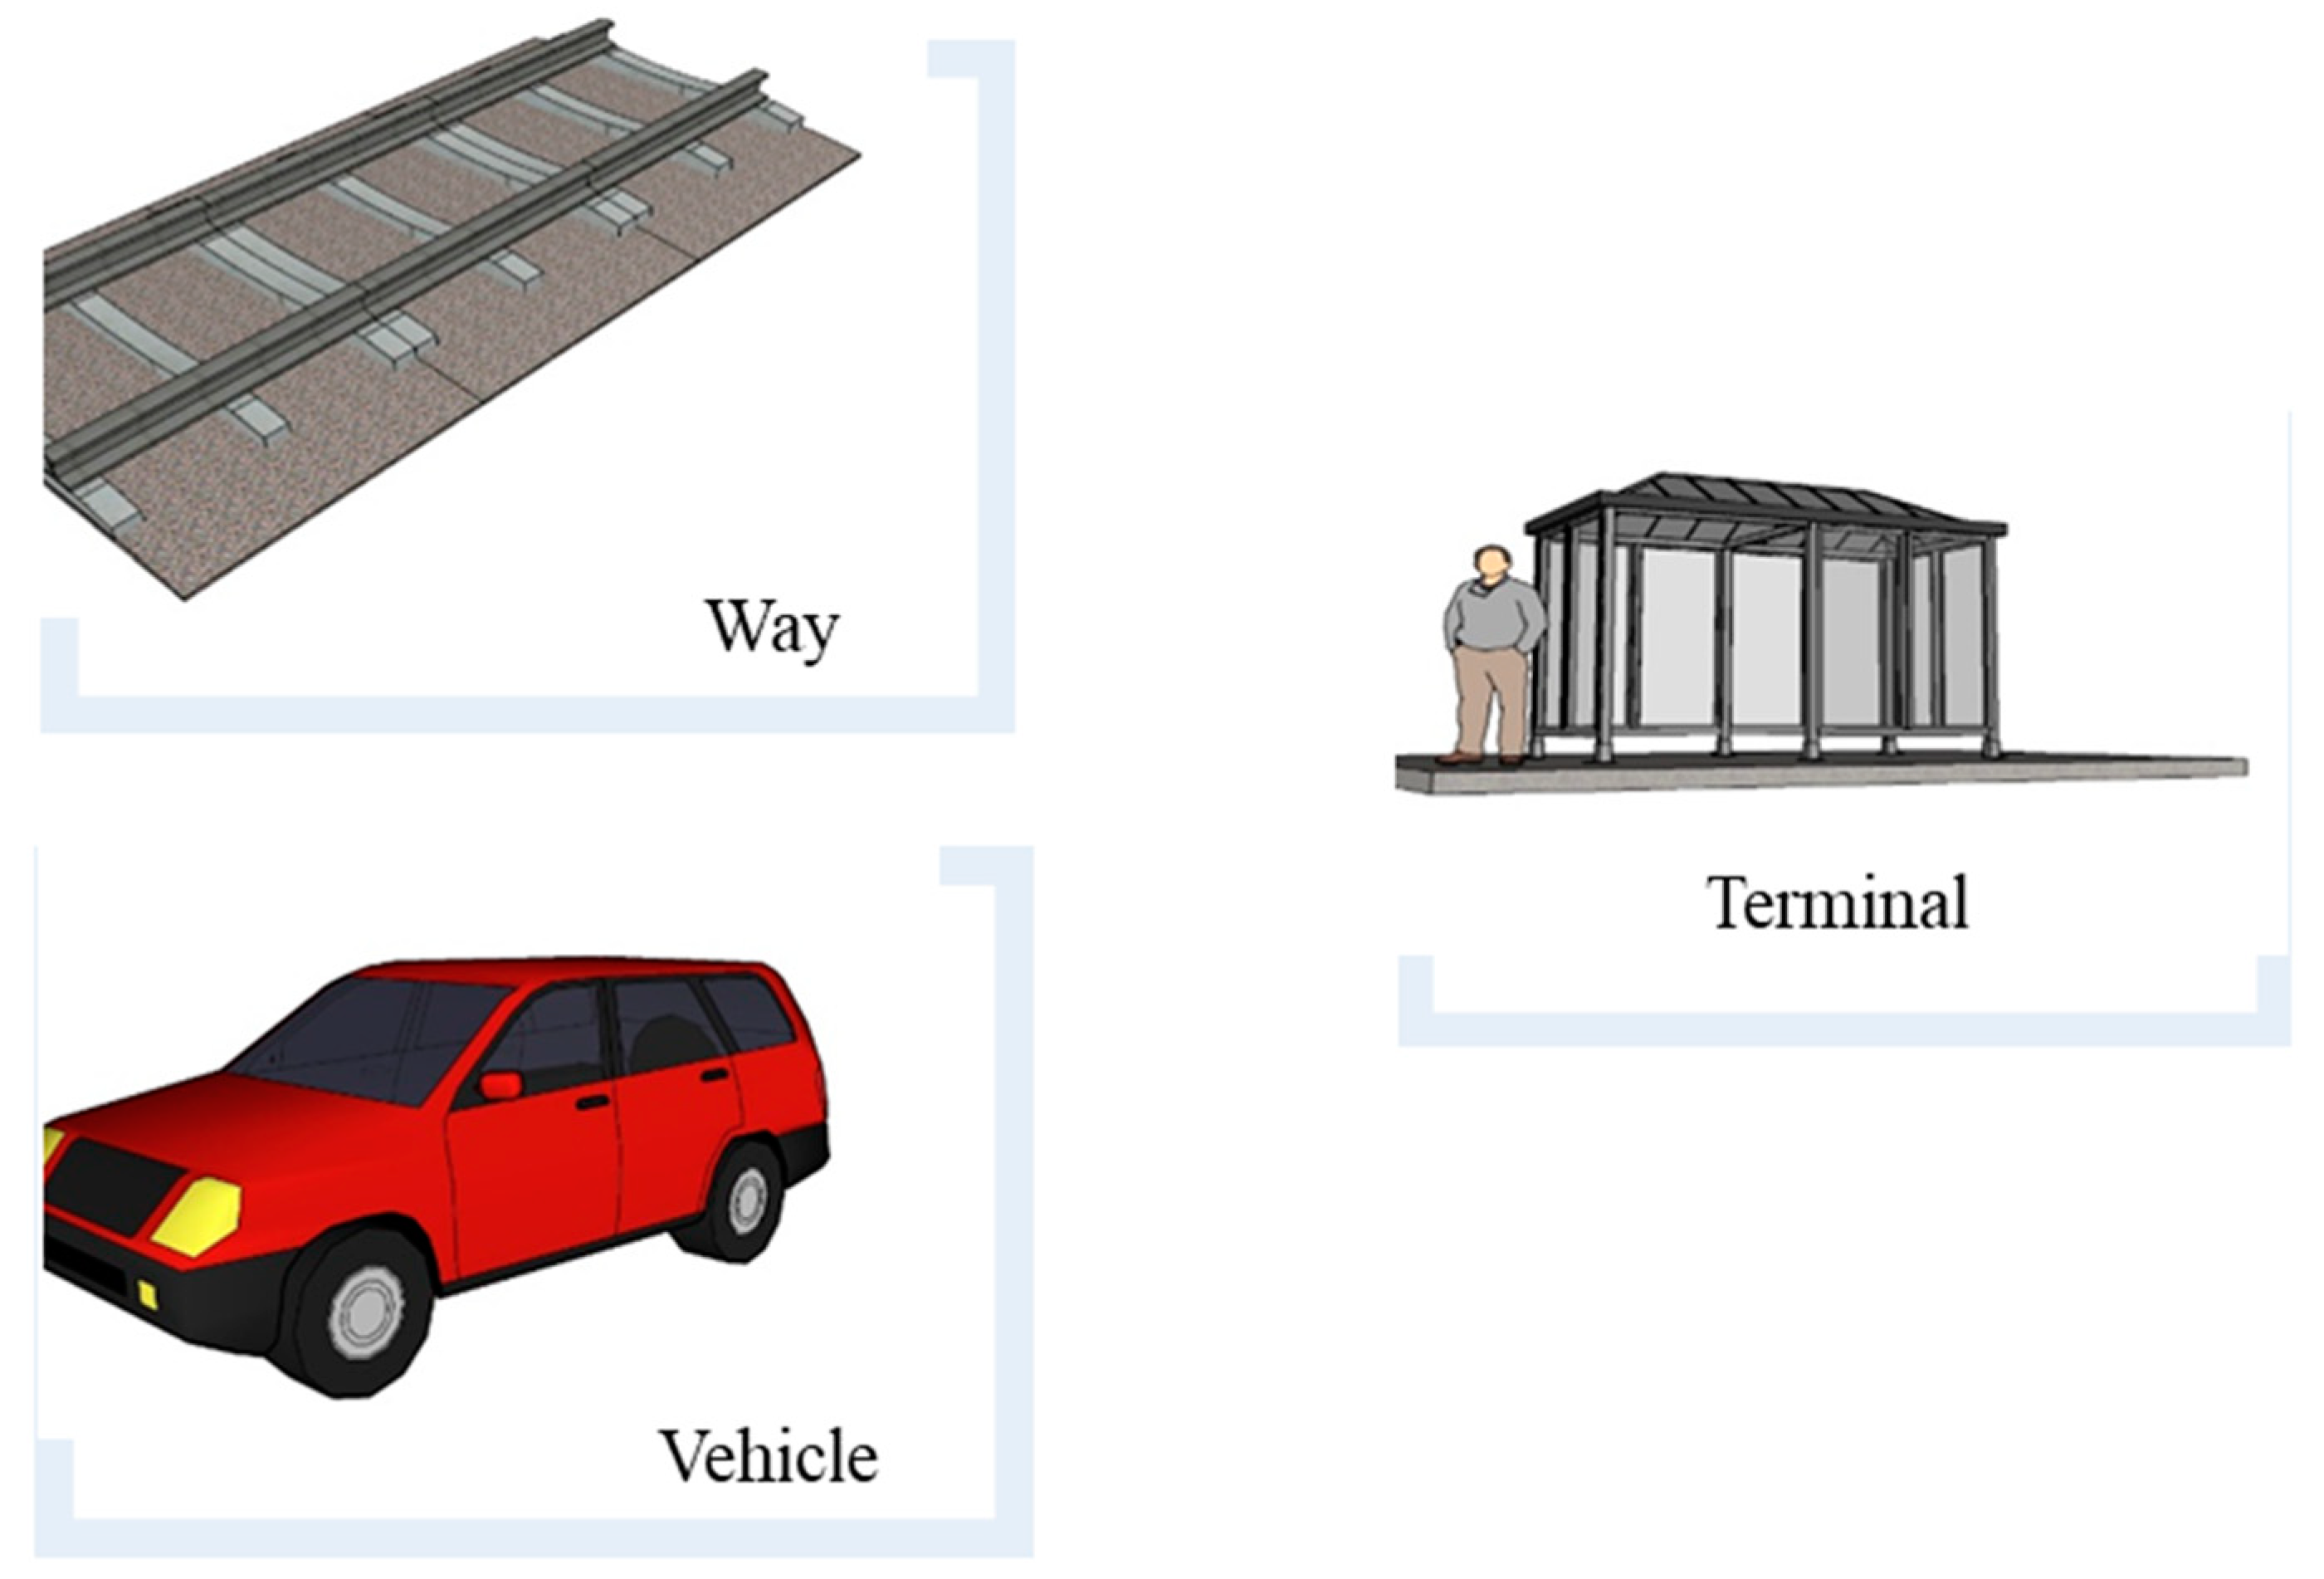 How to drive a modal shift from private vehicles to public transport,  walking and cycling